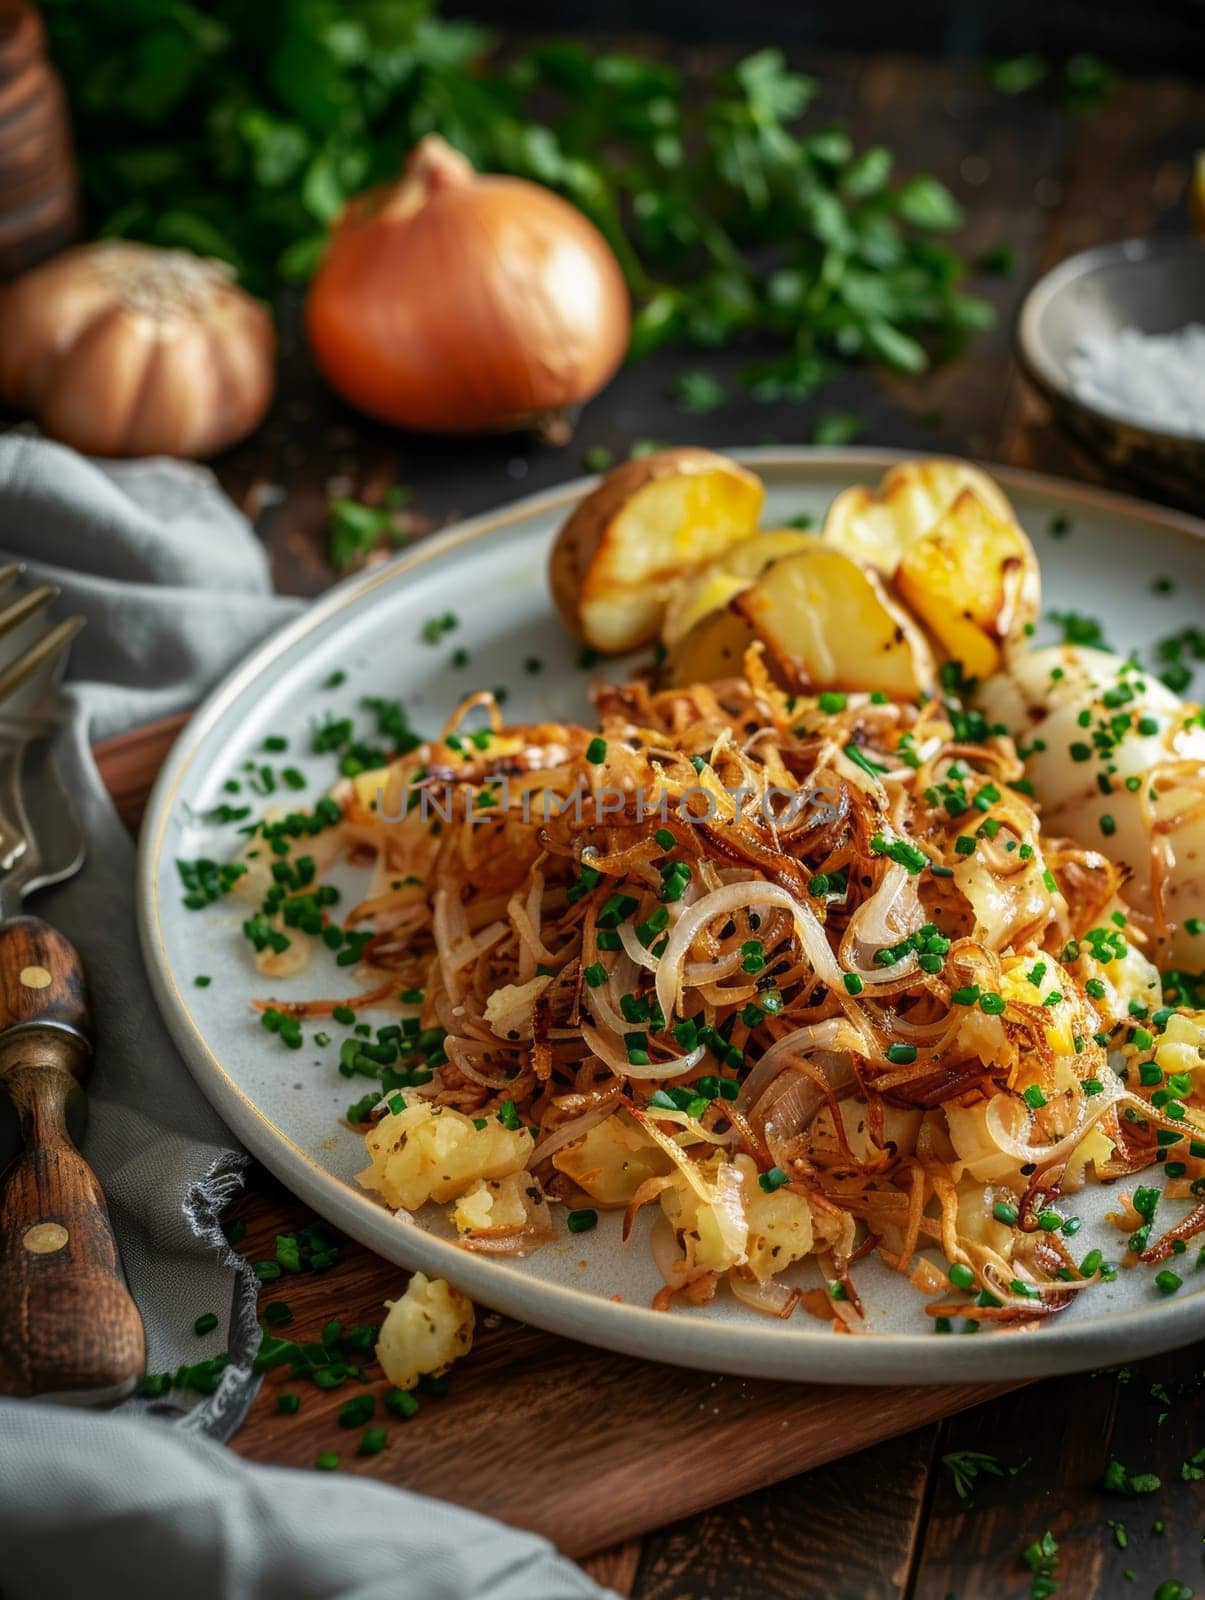 A traditional Portuguese dish of bacalhau a bras, featuring shredded salt cod, sauteed onions, and crispy fried potatoes, presented on a plate for an authentic and mouthwatering culinary display. by sfinks